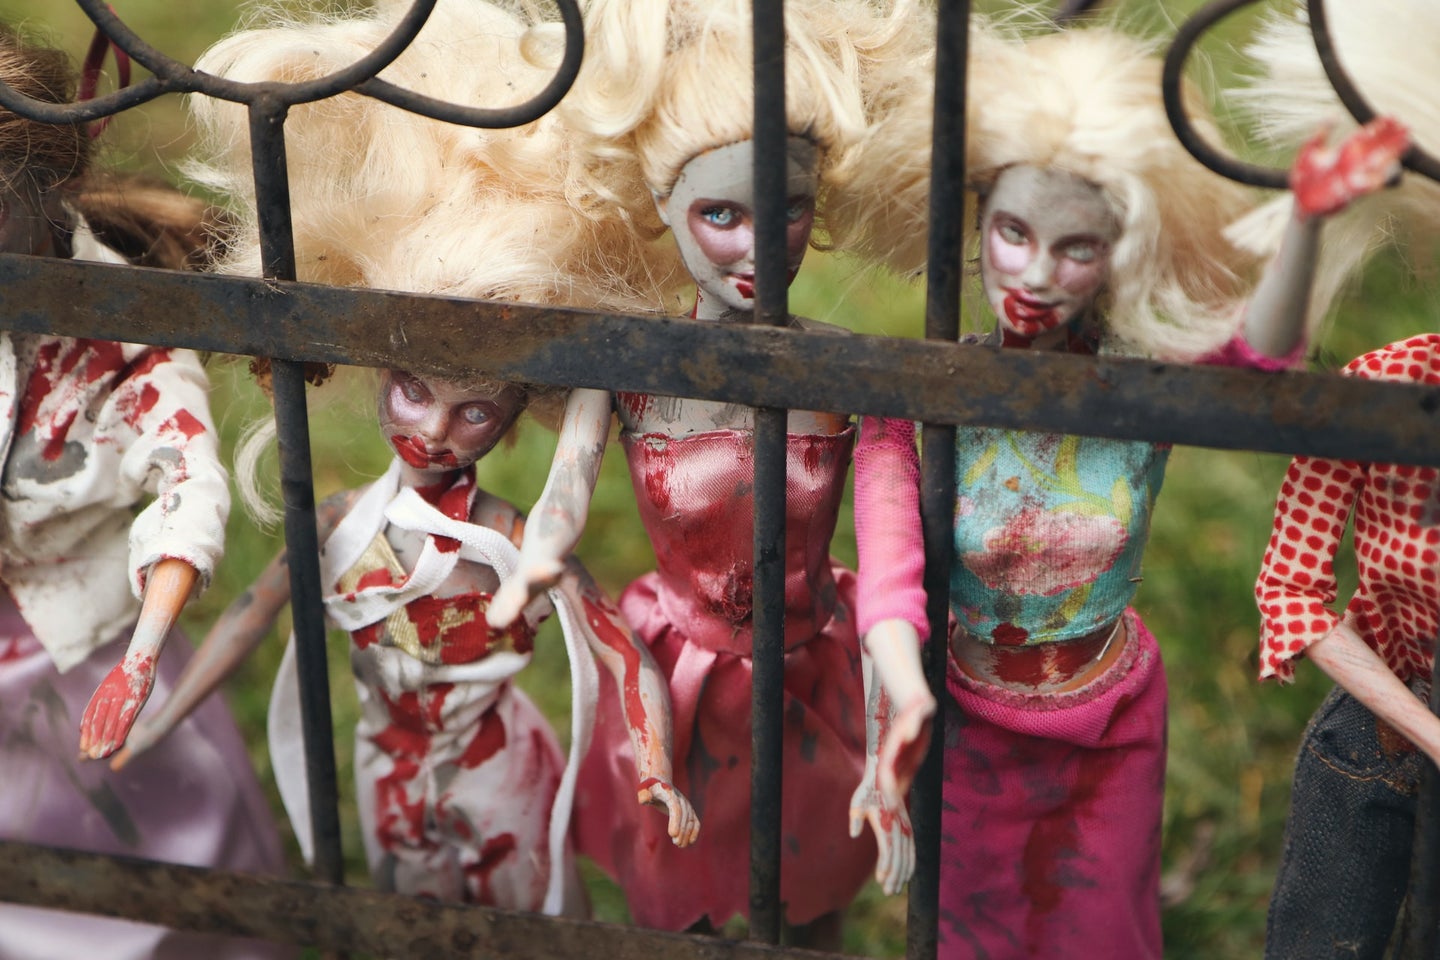 A row of Barbie dolls with fake blood